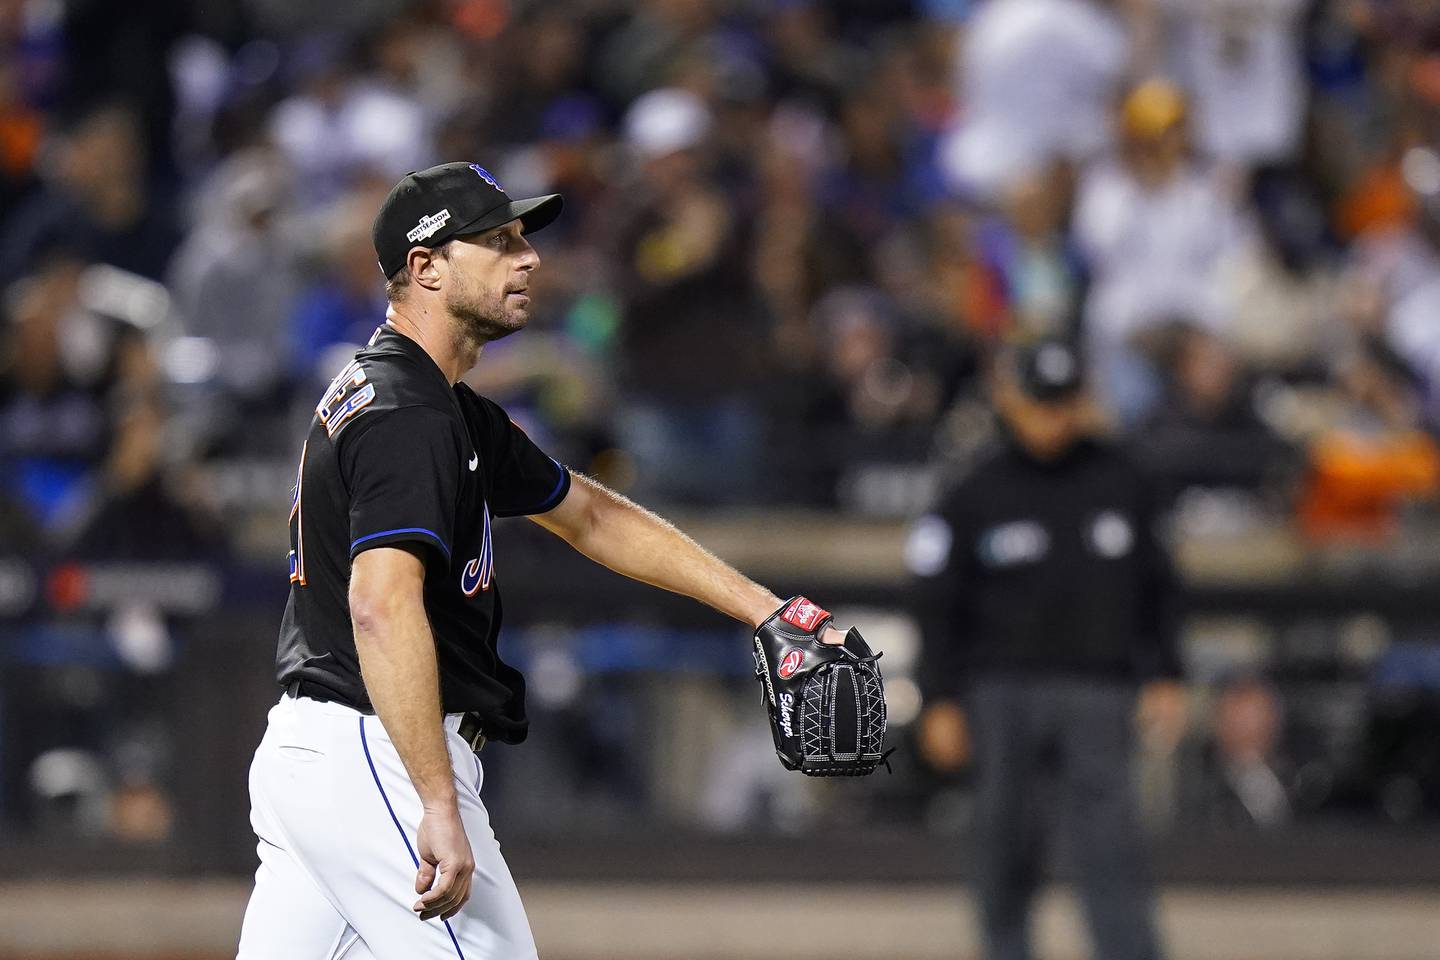 Mets starting pitcher Max Scherzer reacts after giving up a three-run home run to Padres left fielder Jurickson Profar during the fifth inning of Game 1 of a National League wild-card series Friday in New York. The Padres won 7-1.